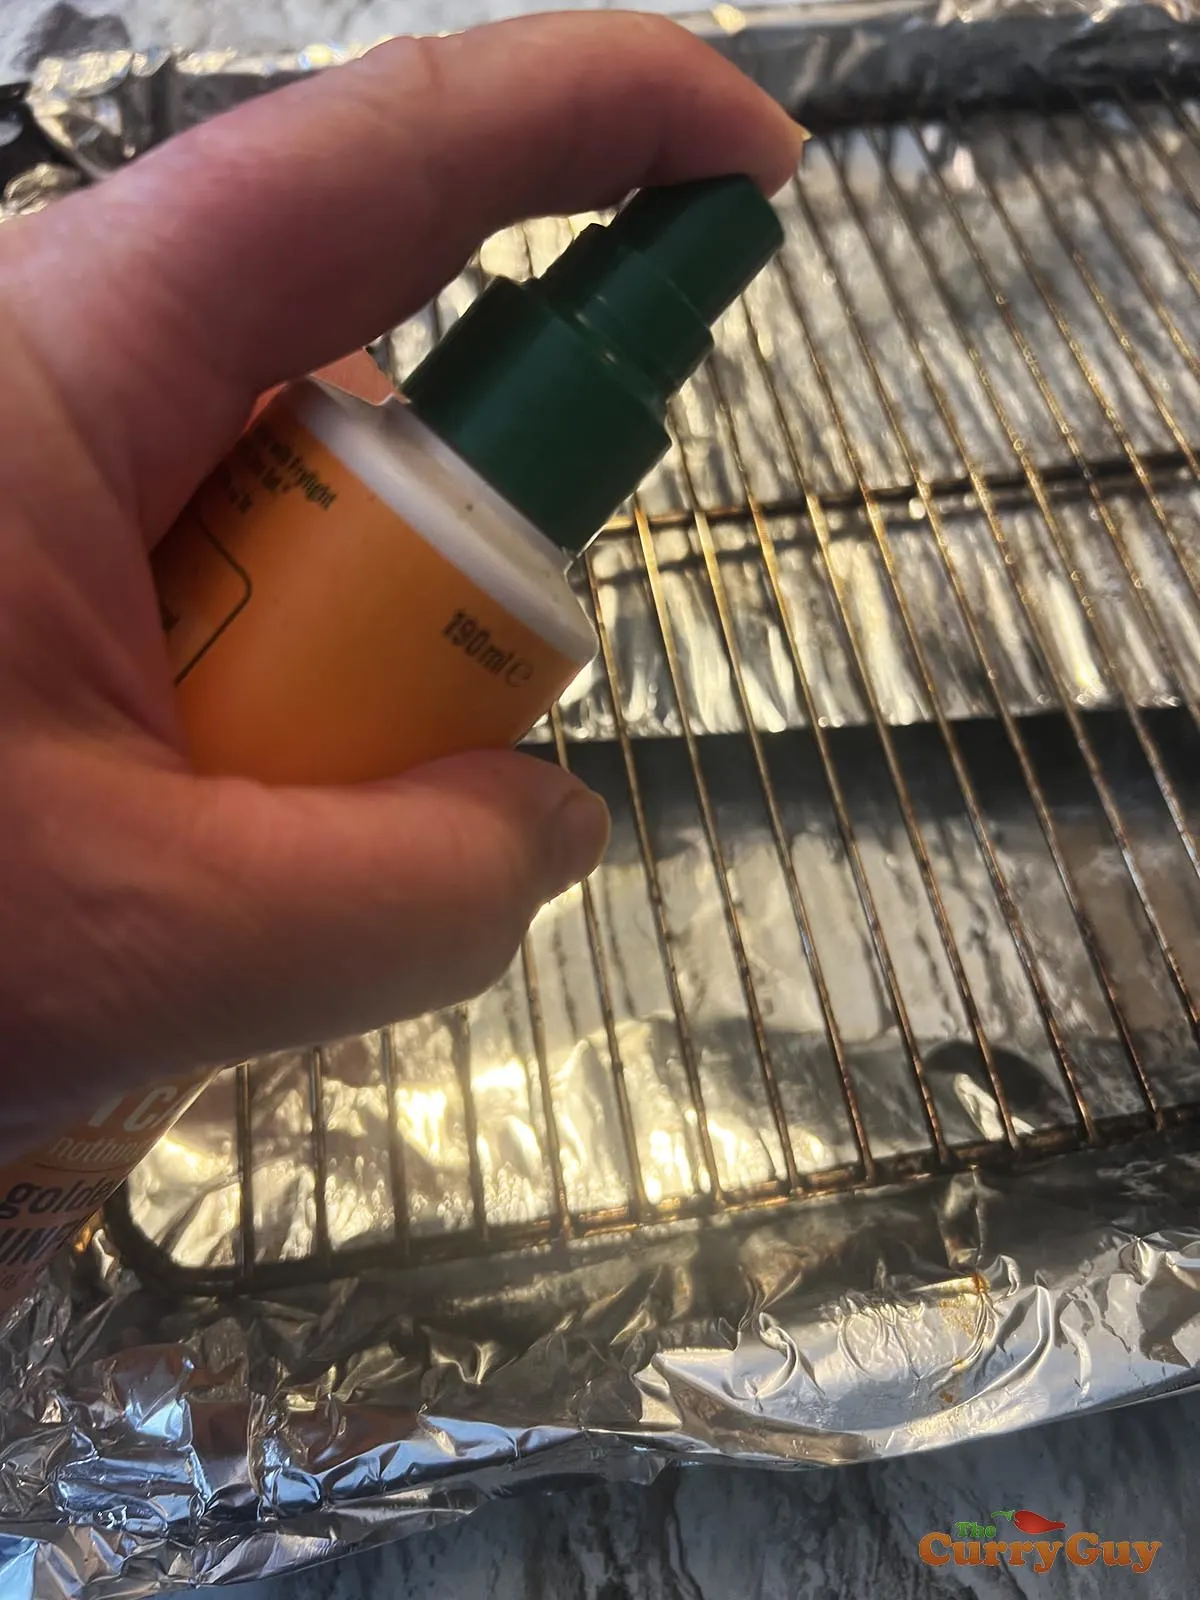 Greasing a wire rack for cooking